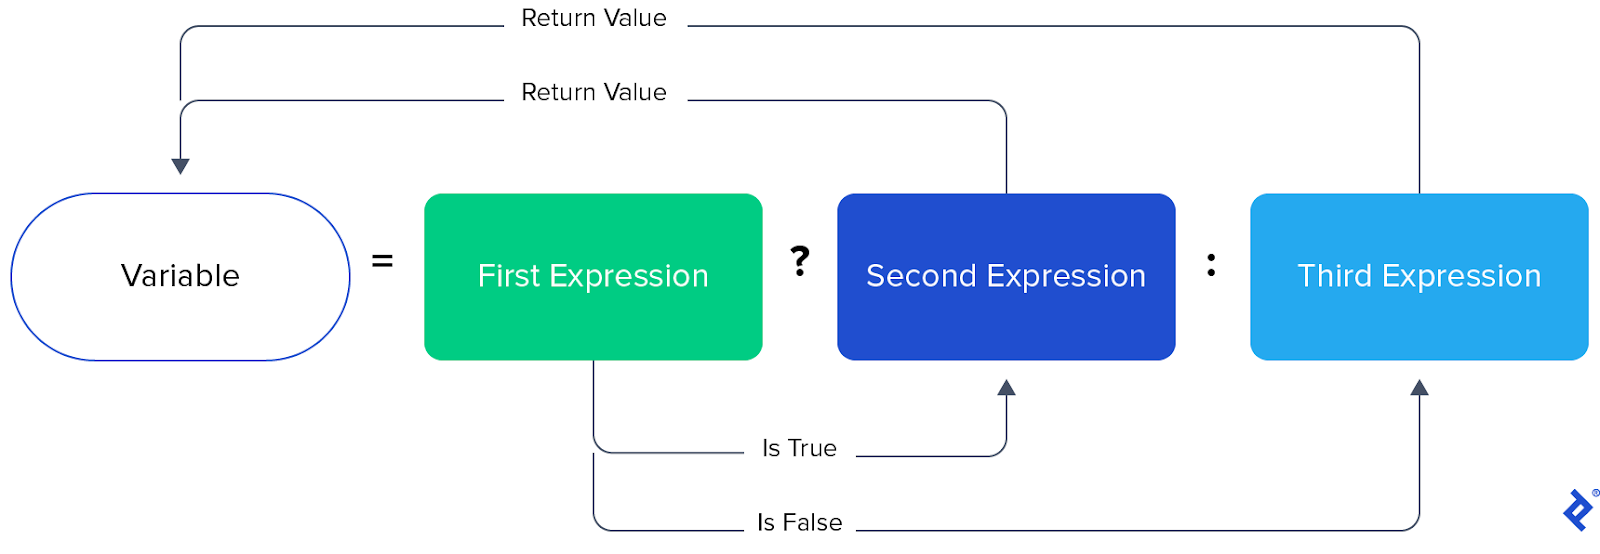 From left to right are shown a white Variable oval, an equals sign, a green First Expression box, a question mark, a dark blue Second Expression box, a colon, and a light blue Third Expression box. The First Expression box has two arrows: one labeled âIs Trueâ points to the Second Expression box, and the second labeled âIs Falseâ points to the Third Expression box. Second Expression and Third Expression each have their own Return Value arrow pointing to the Variable oval.